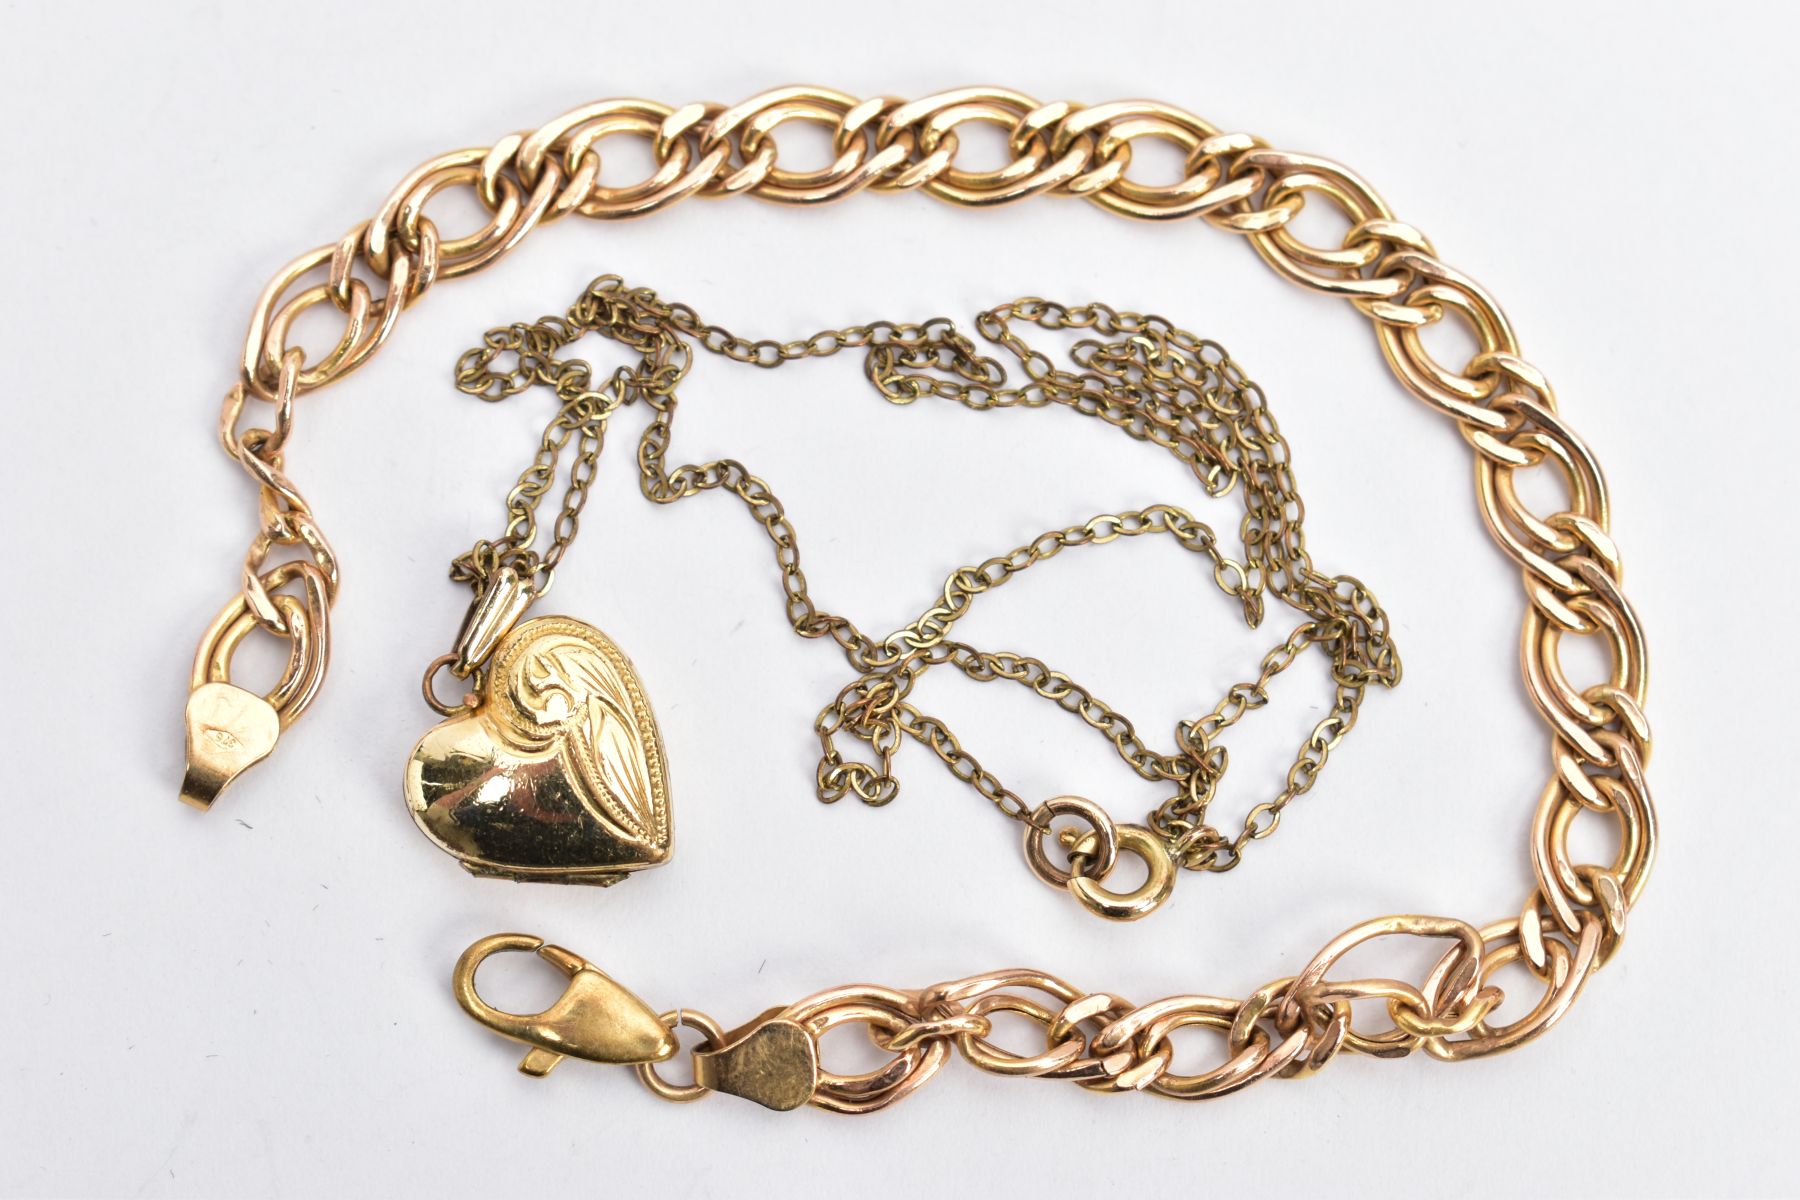 A 9CT GOLD BRACELET AND A HEART LOCKET PENDANT NECKLACE, the double curb link bracelet, fitted